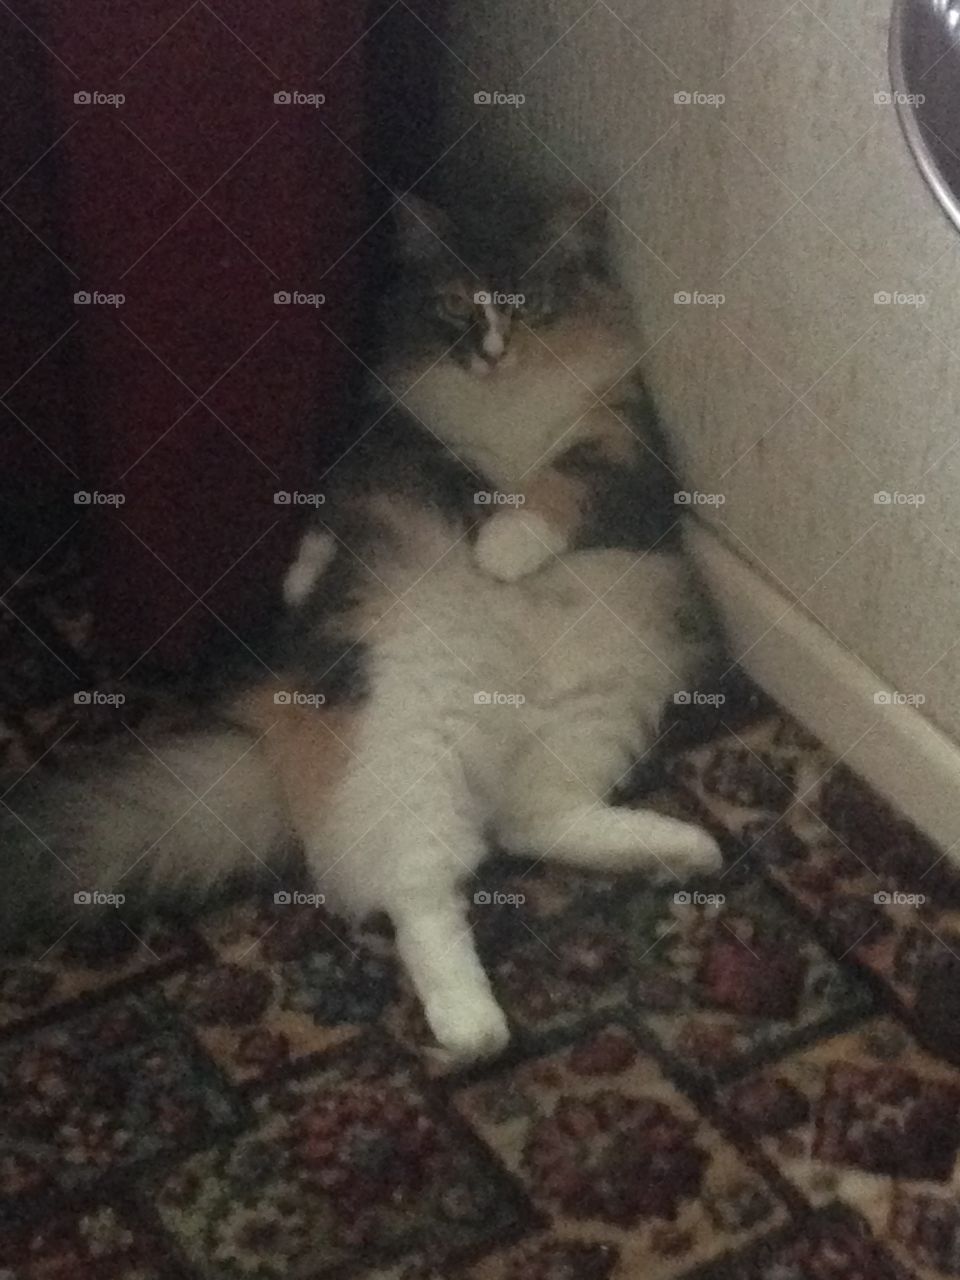 Misty (a very furry kitty) sitting up in her relaxed Buddha pose